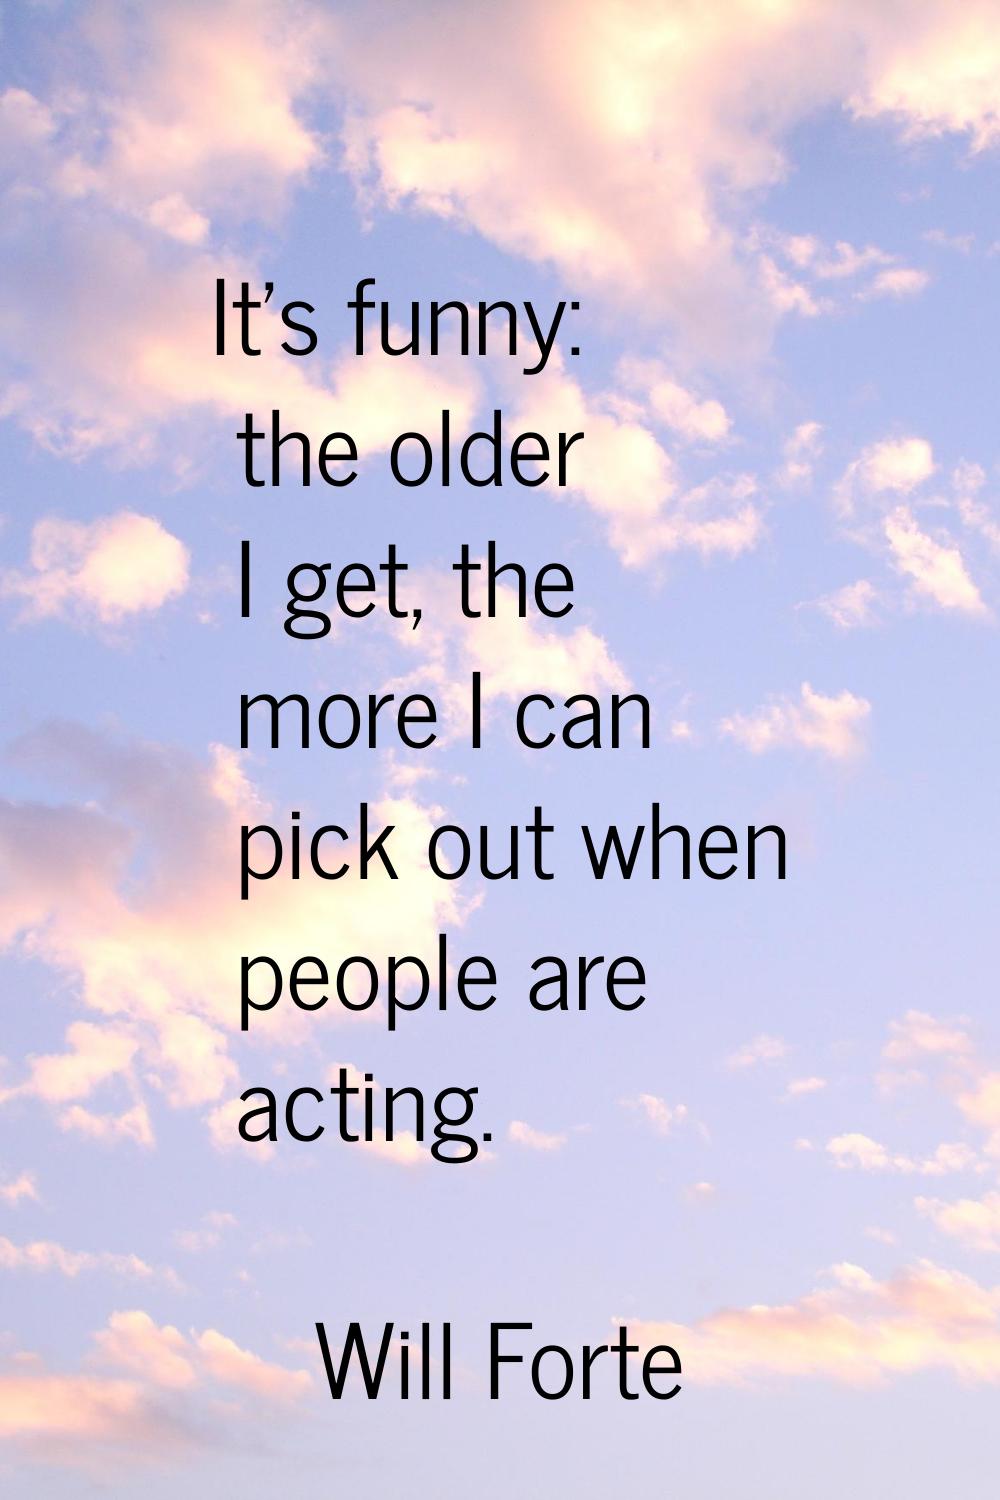 It's funny: the older I get, the more I can pick out when people are acting.